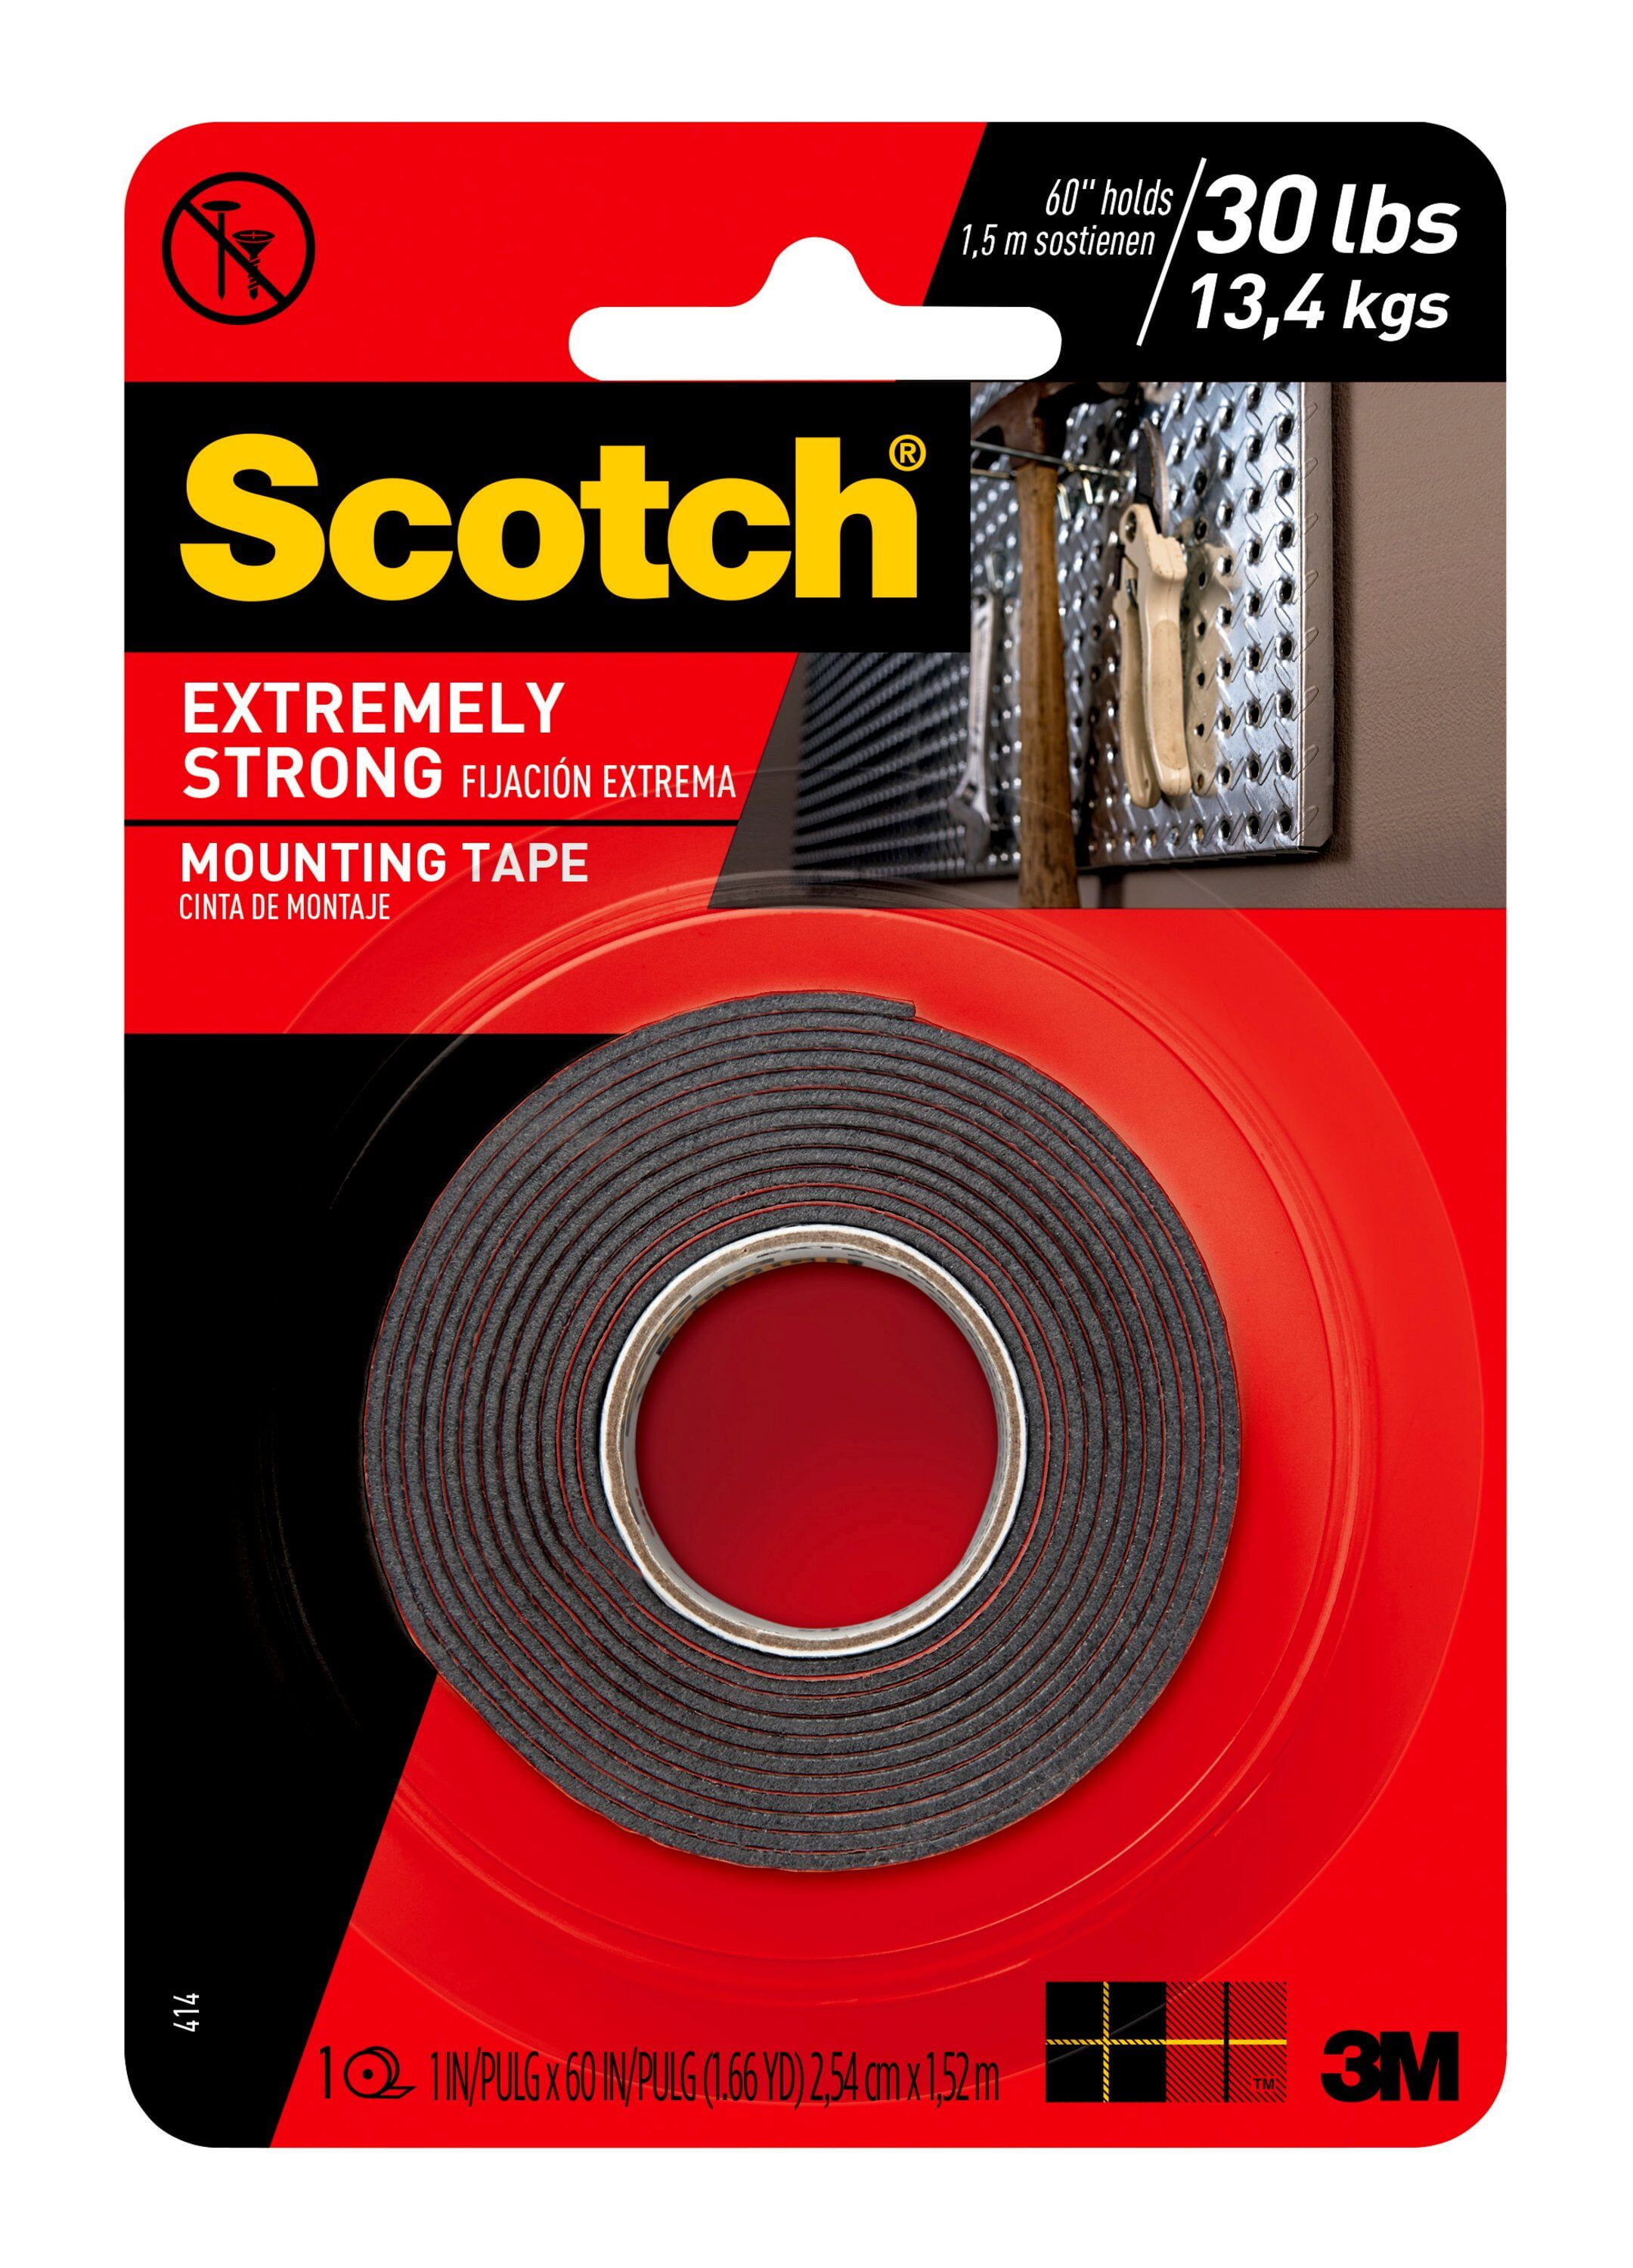 Hi everyone! I'm looking for suggestions for food safe tape? Not tape to  stick on food though, tape that can be applied to a surface and food can  come into contact with